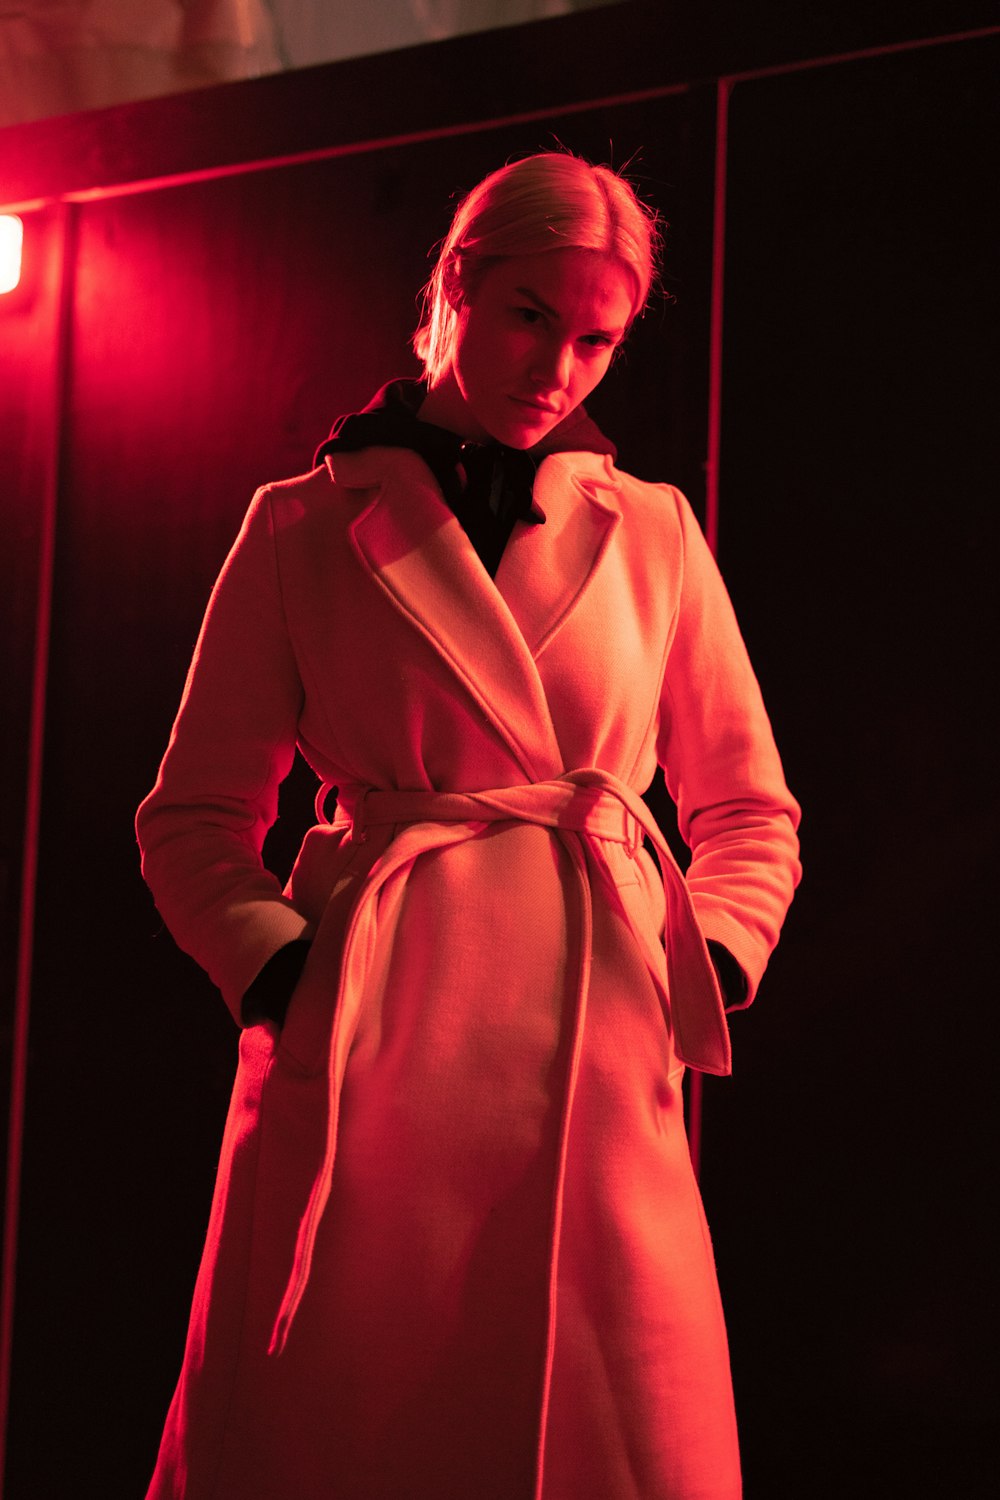 a woman in a long coat standing in a dark room